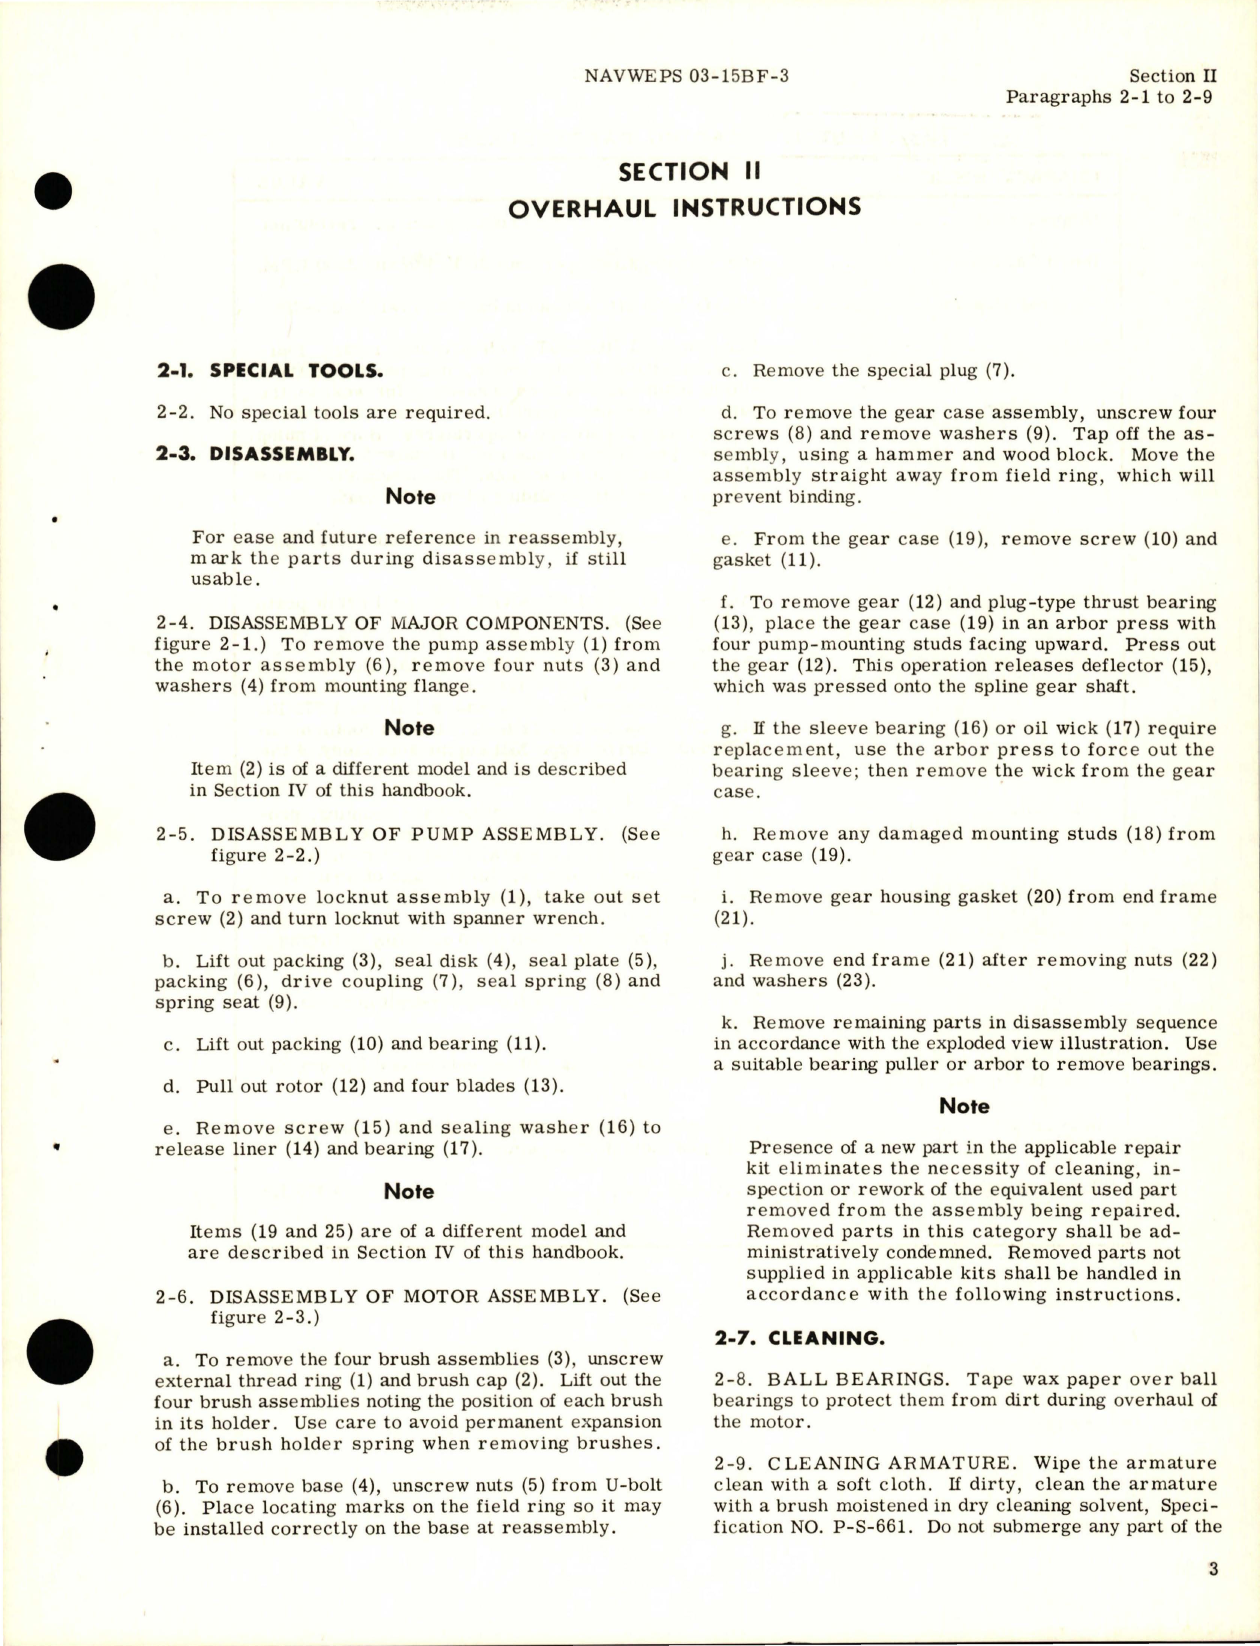 Sample page 7 from AirCorps Library document: Overhaul Instructions for Electric Motor-Driven Hydraulic Oil Pump Assembly - Parts RG6100E1 and RG6100H